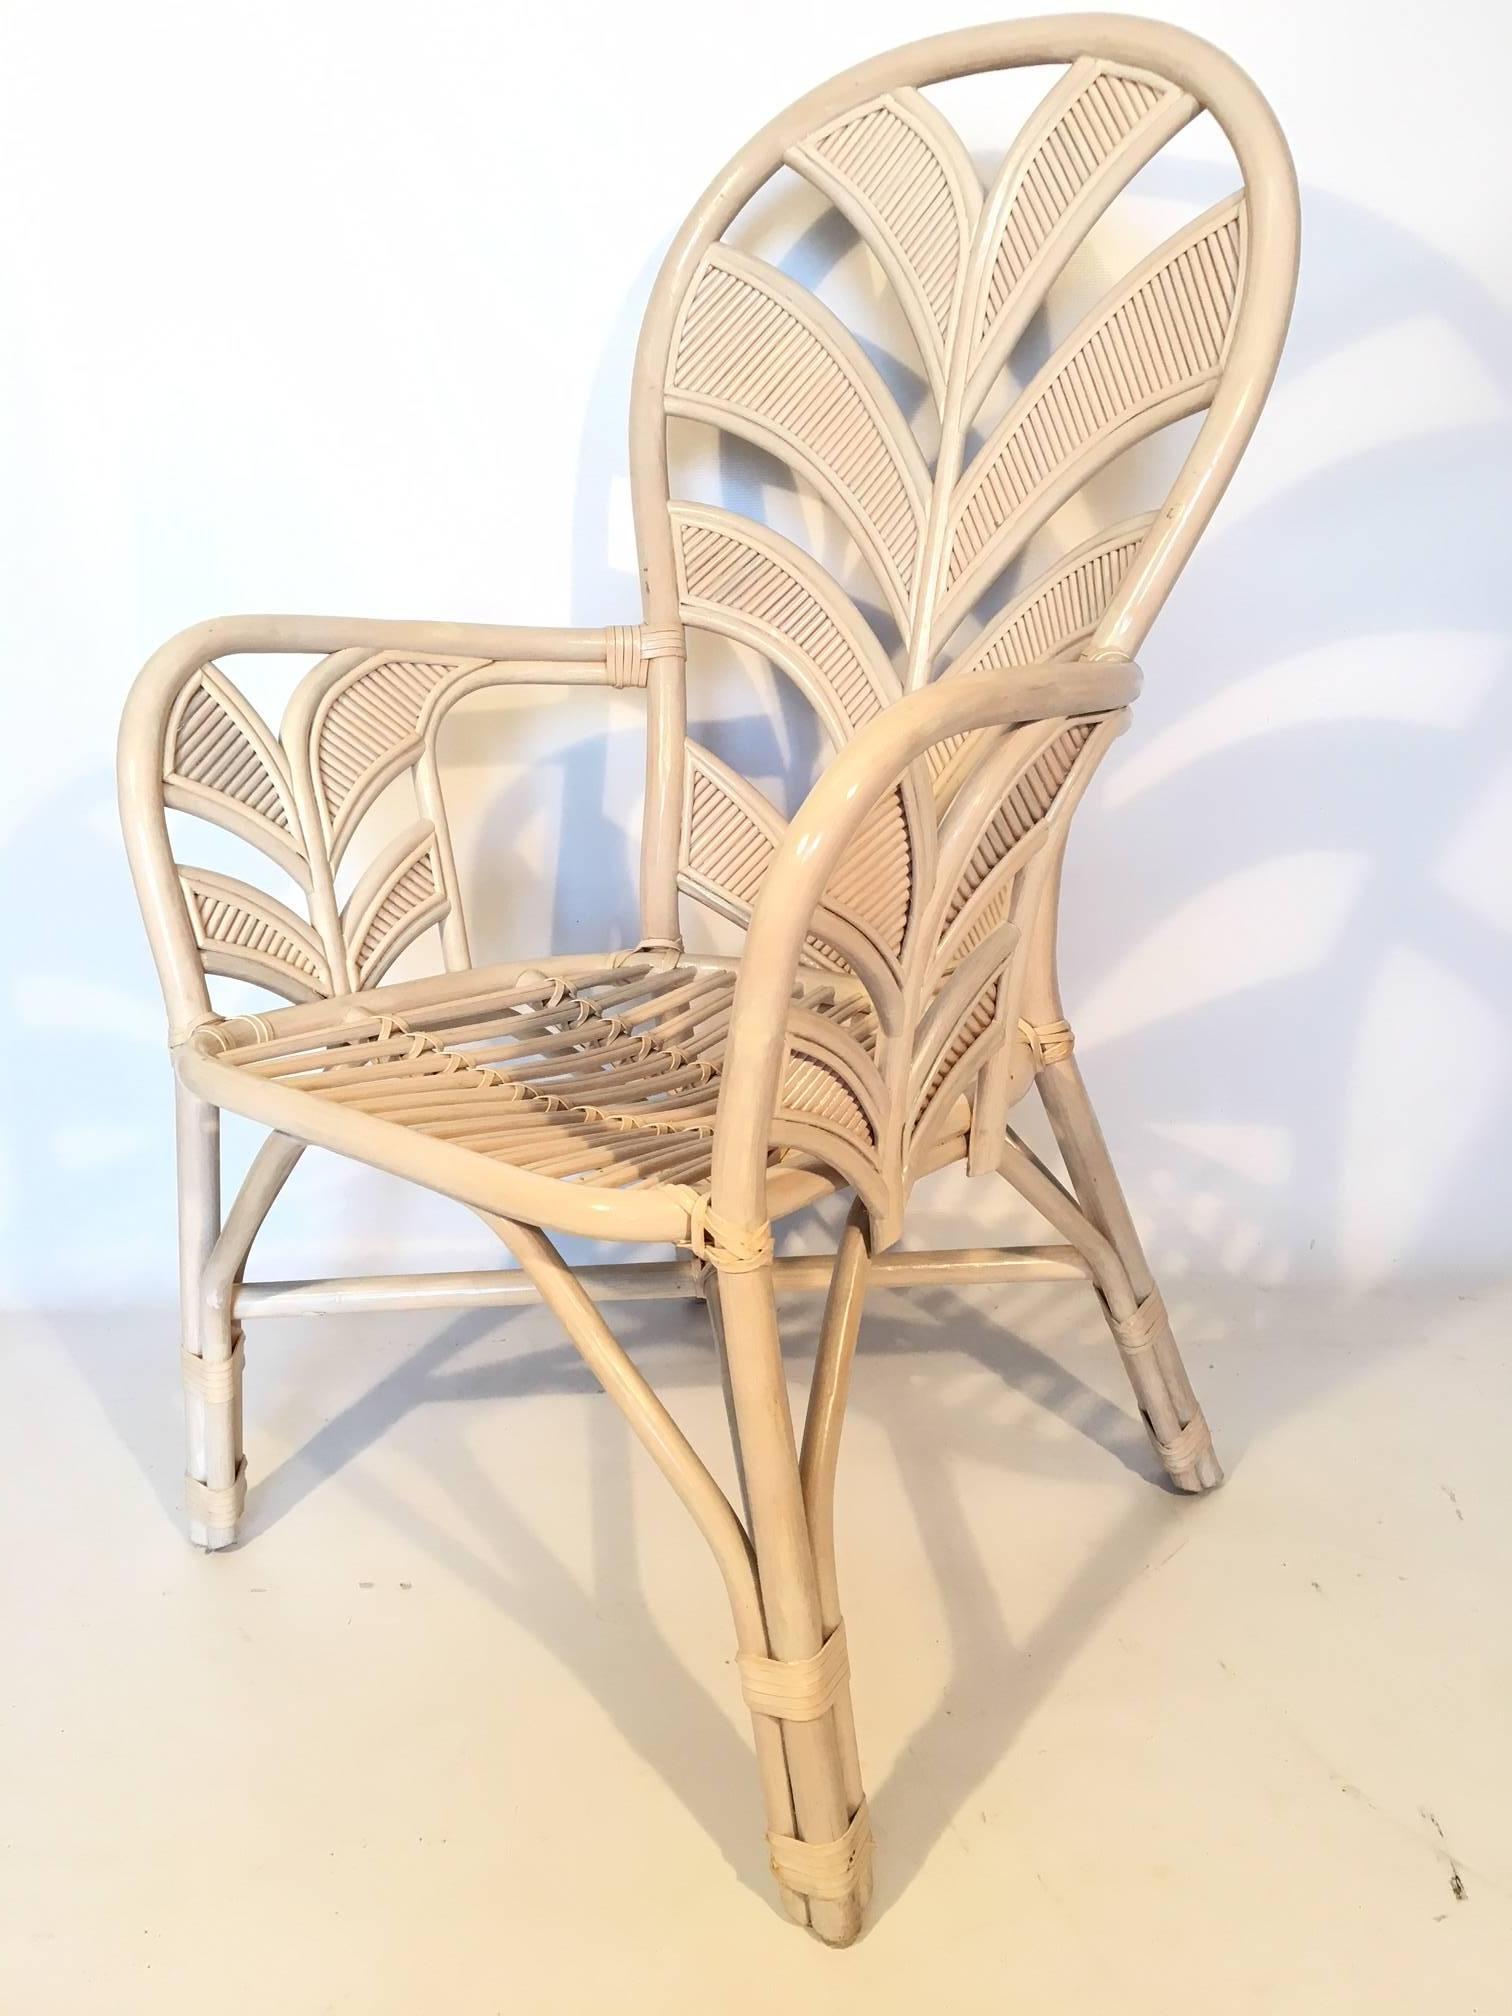 Midcentury rattan arm chairs feature sculptural palm frond motif for a touch of vintage Palm Beach style in any decor. Very good condition both structurally and cosmetically. Chairs can be purchased individually in any quantity (six available).